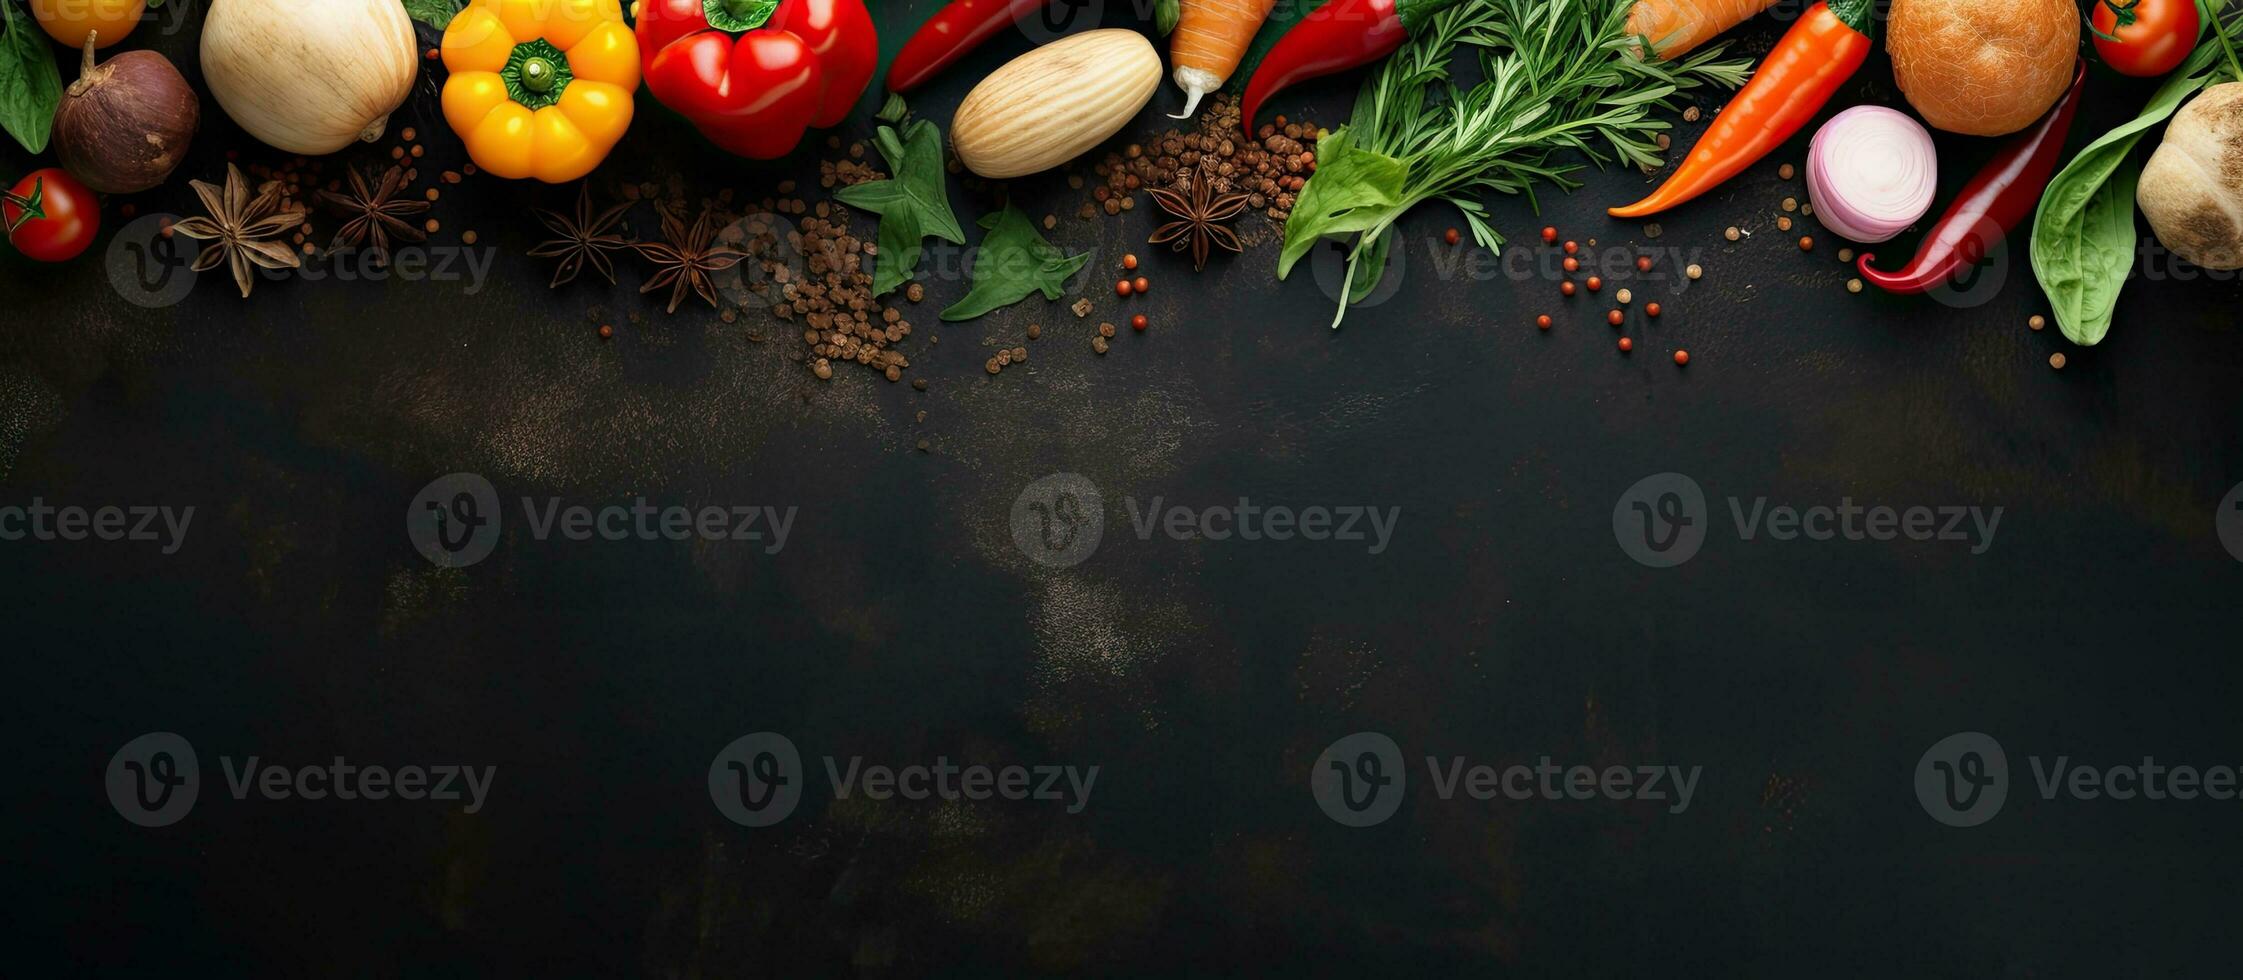 Top view of vibrant spices and fresh vegetables on a dark metal background, offering space for photo